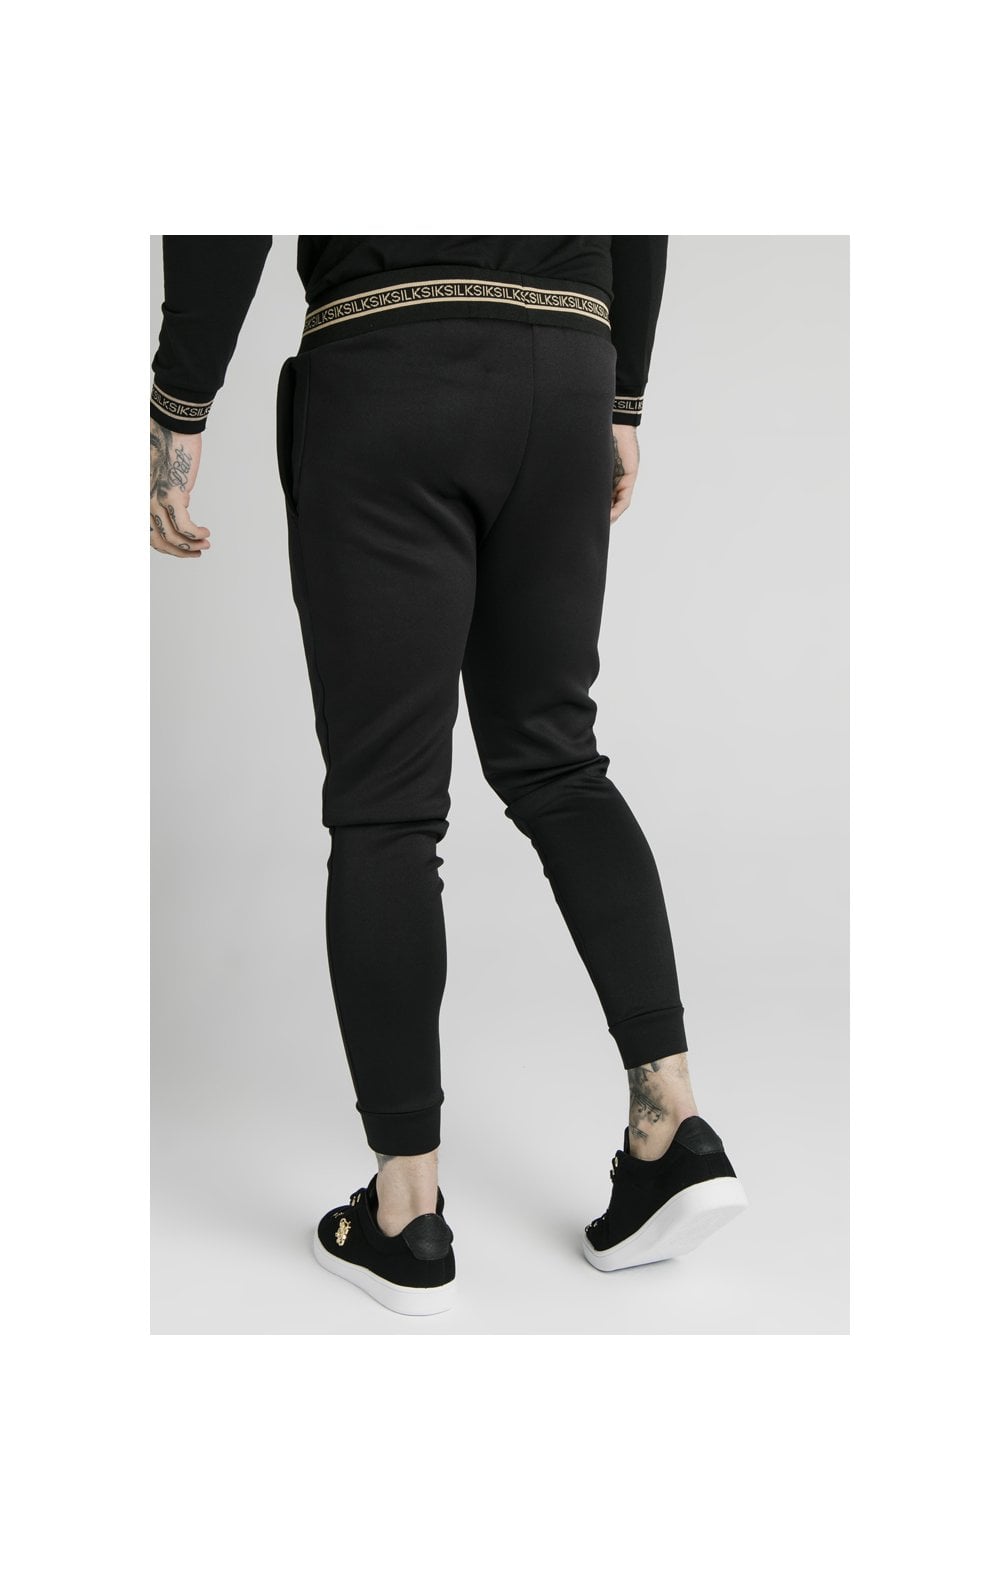 SikSilk Element Muscle Fit Cuff Joggers - Black &amp; Gold (4)